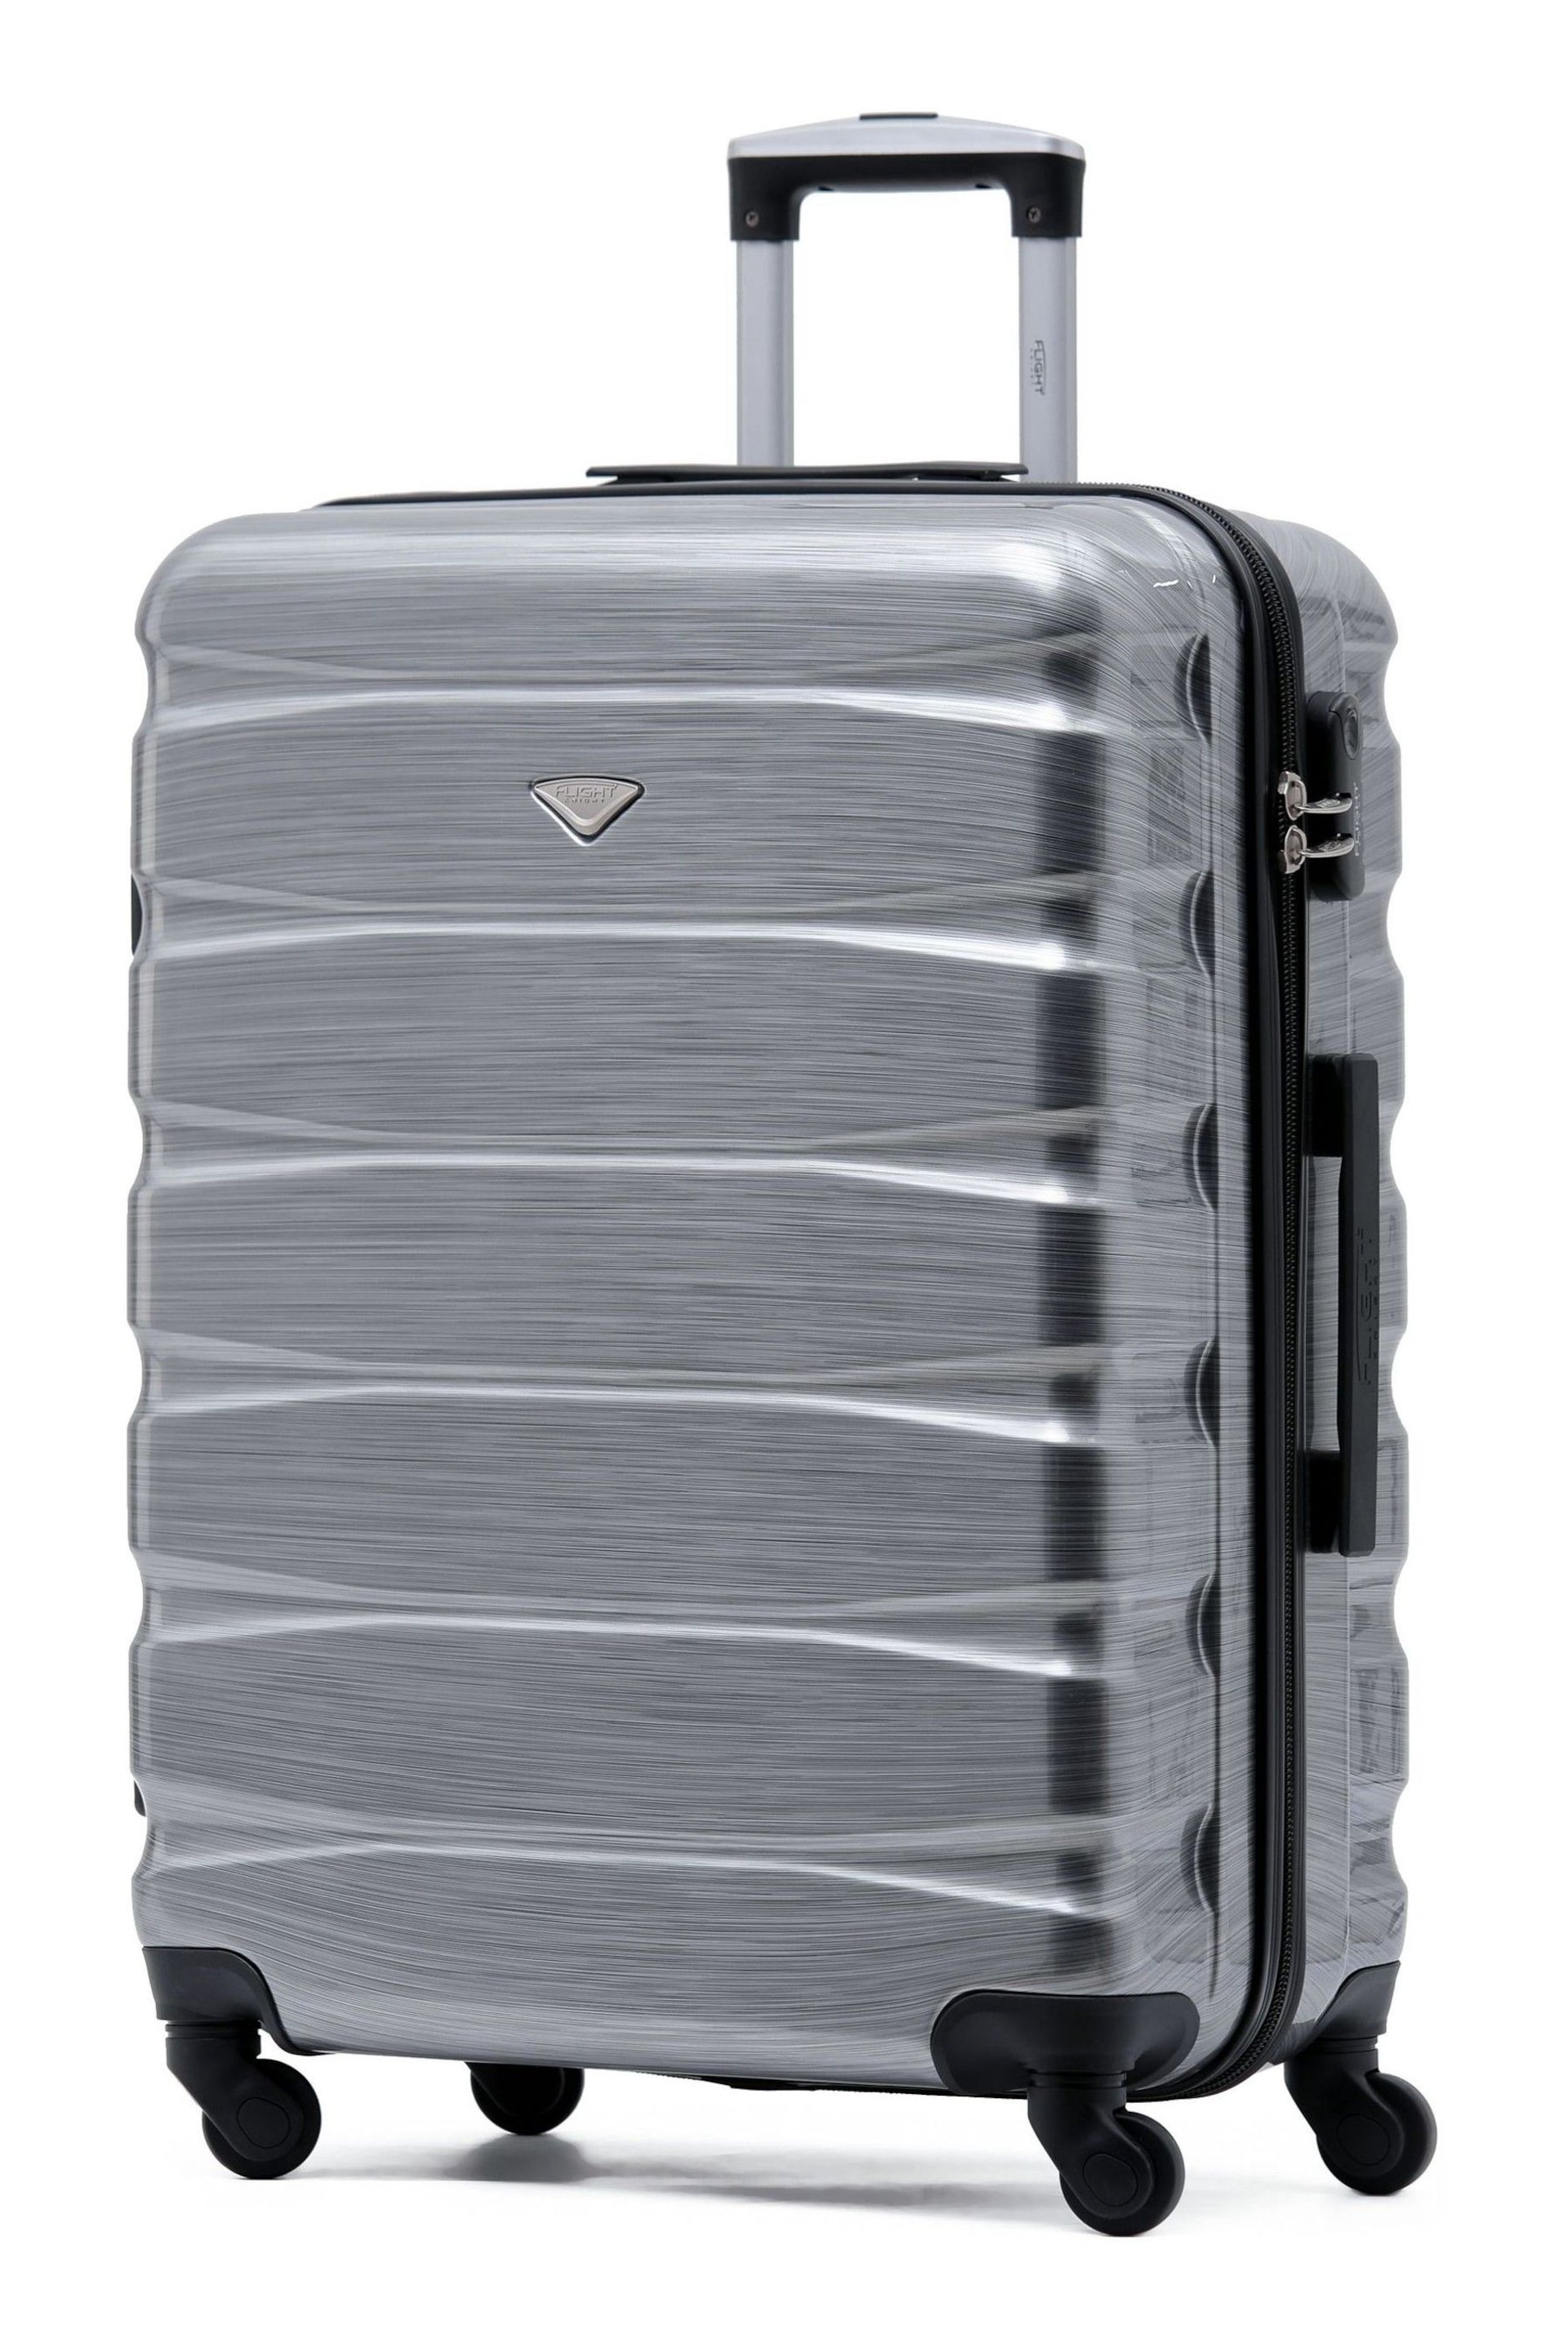 Flight Knight Silver Gloss Medium Hardcase Lightweight Check In Suitcase With 4 Wheels - Image 1 of 1